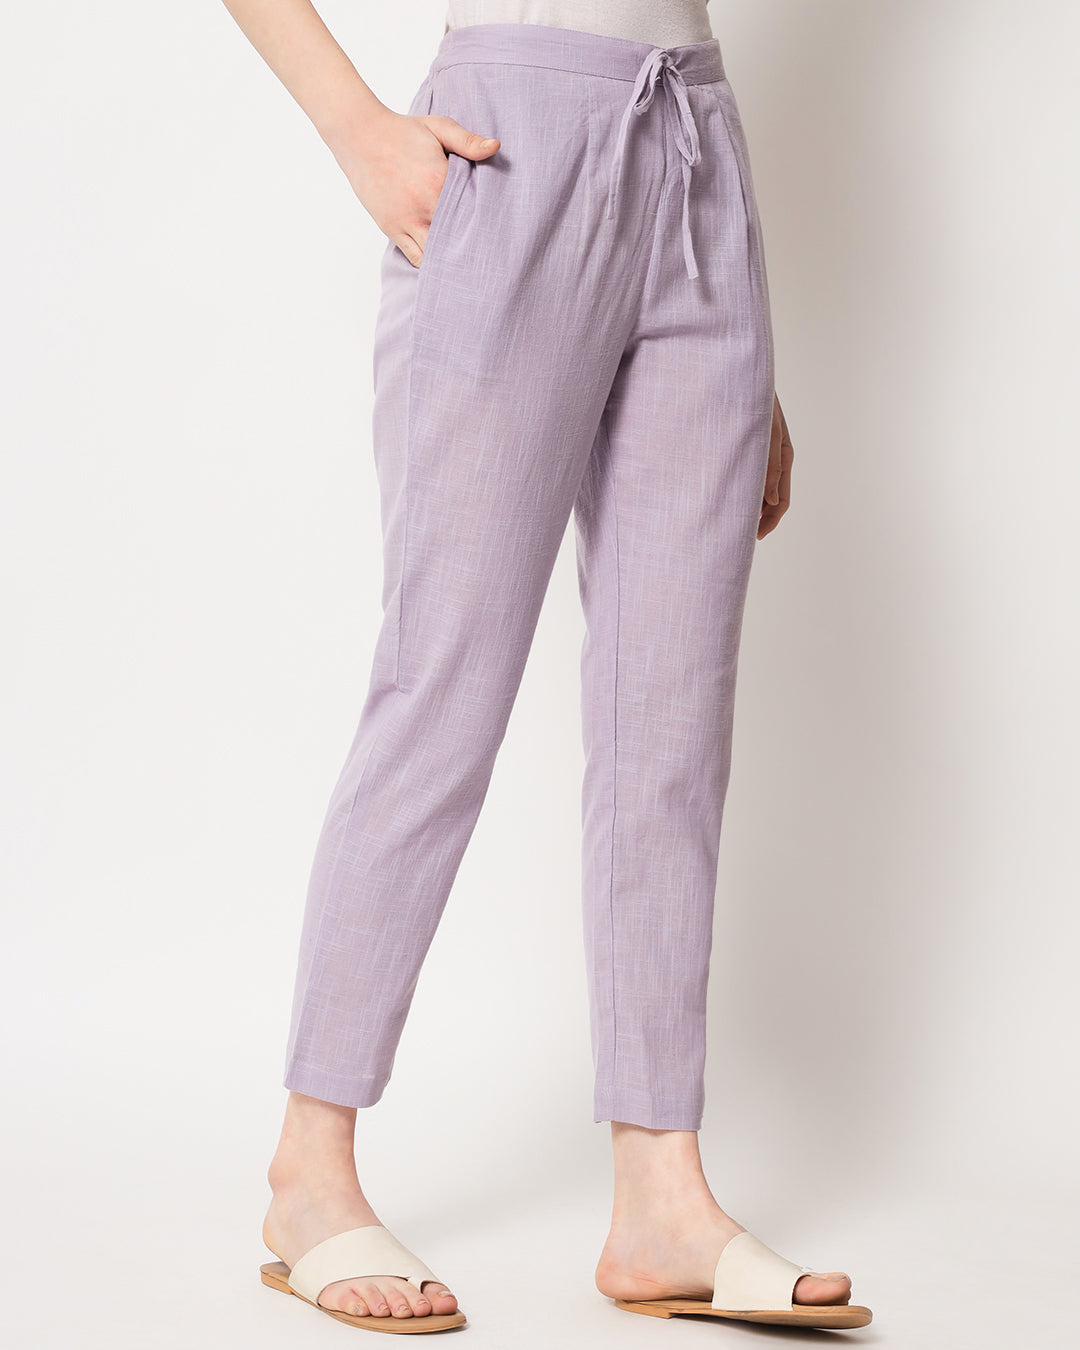 Life in Lilac Cigarette Pants